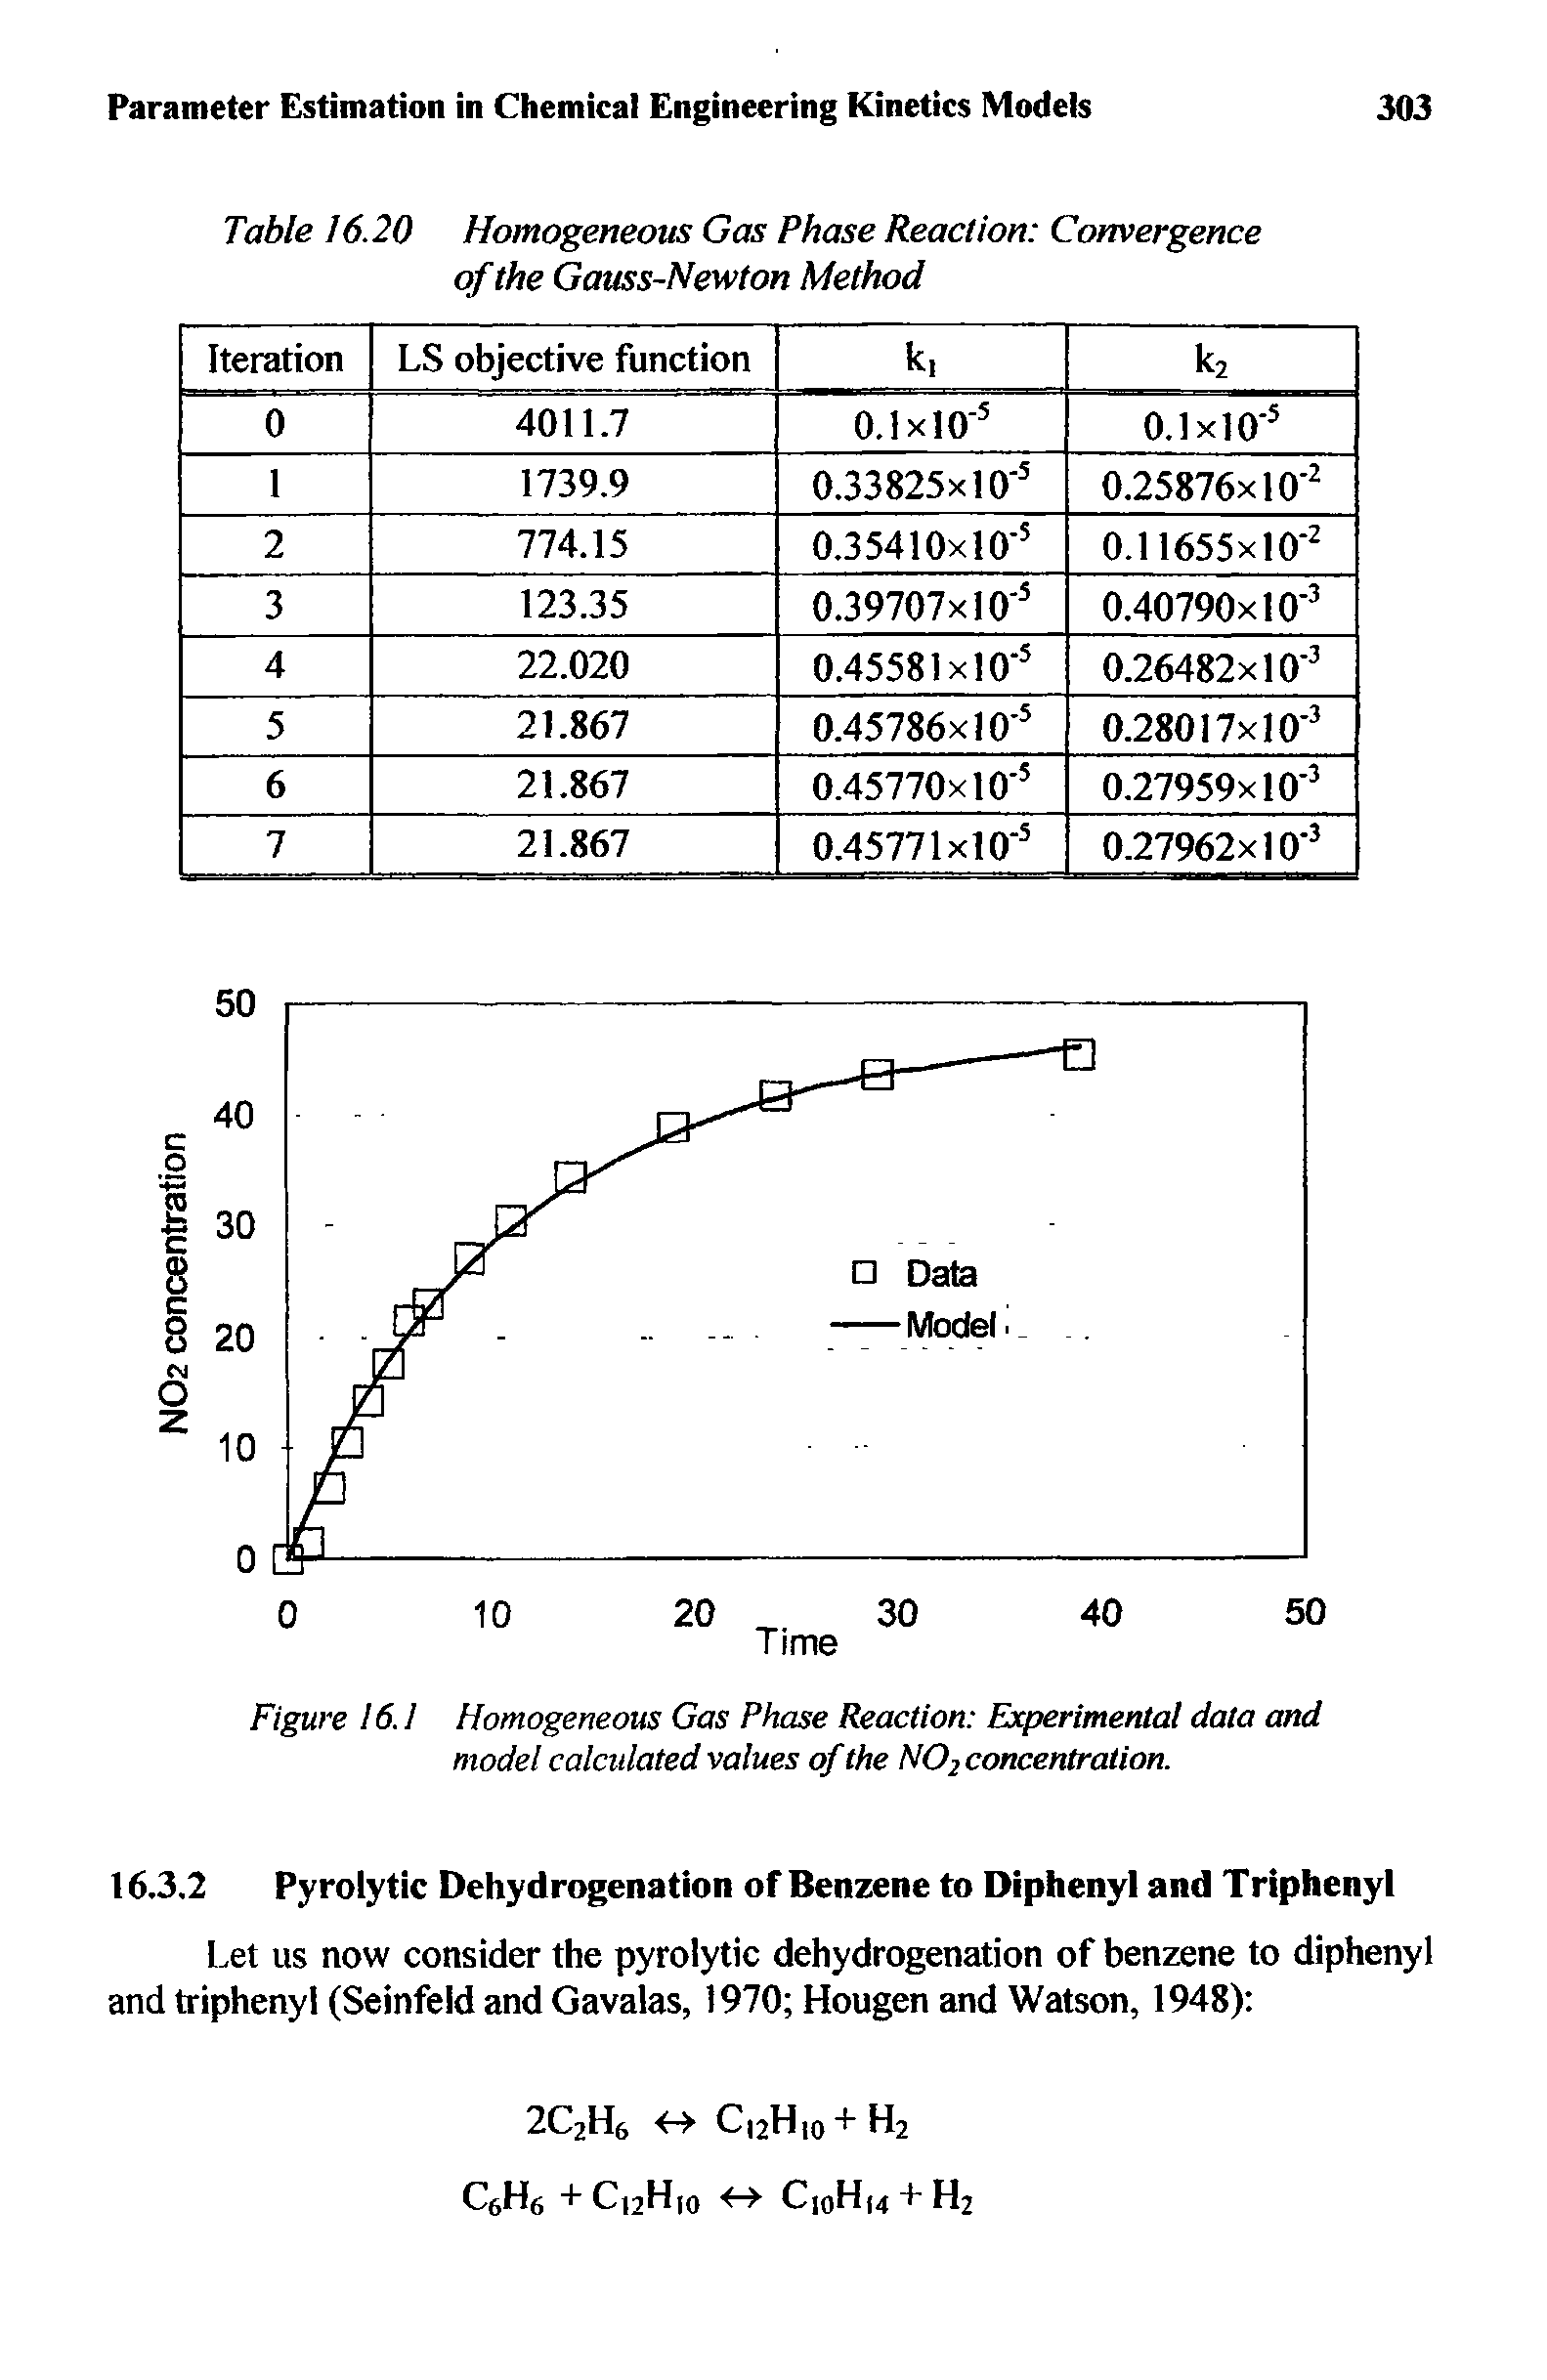 Figure 16.1 Homogeneous Gas Phase Reaction Experimental data and model calculated values of the NQ2 concentration.